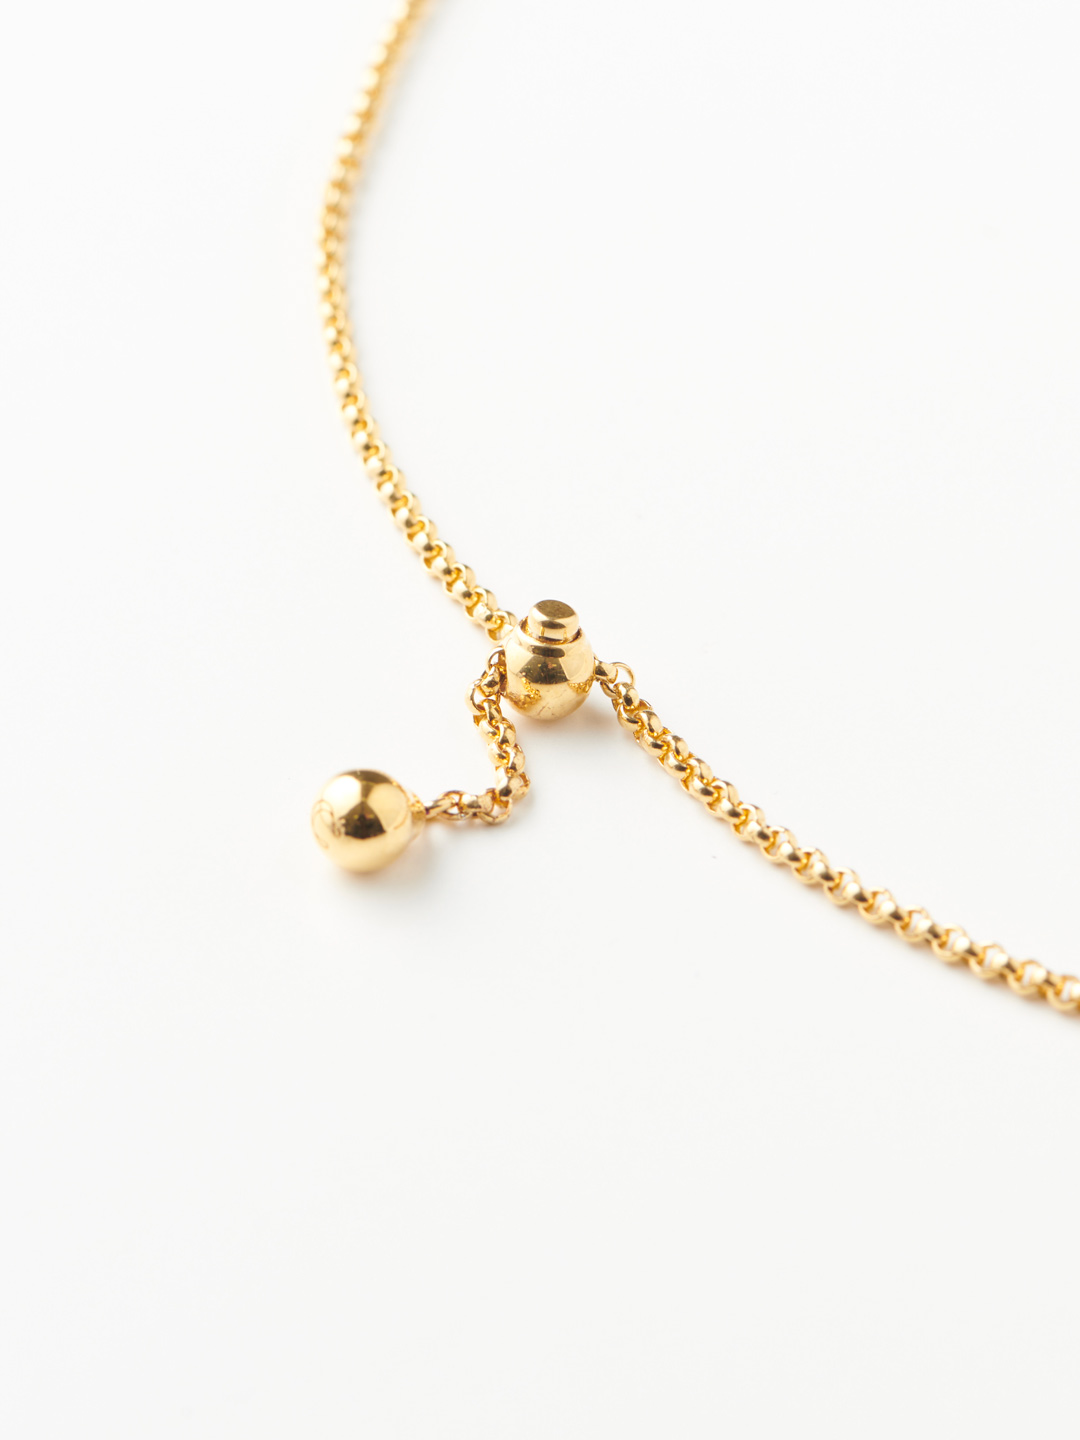 Petit Round Trip Necklace - Yellow Gold